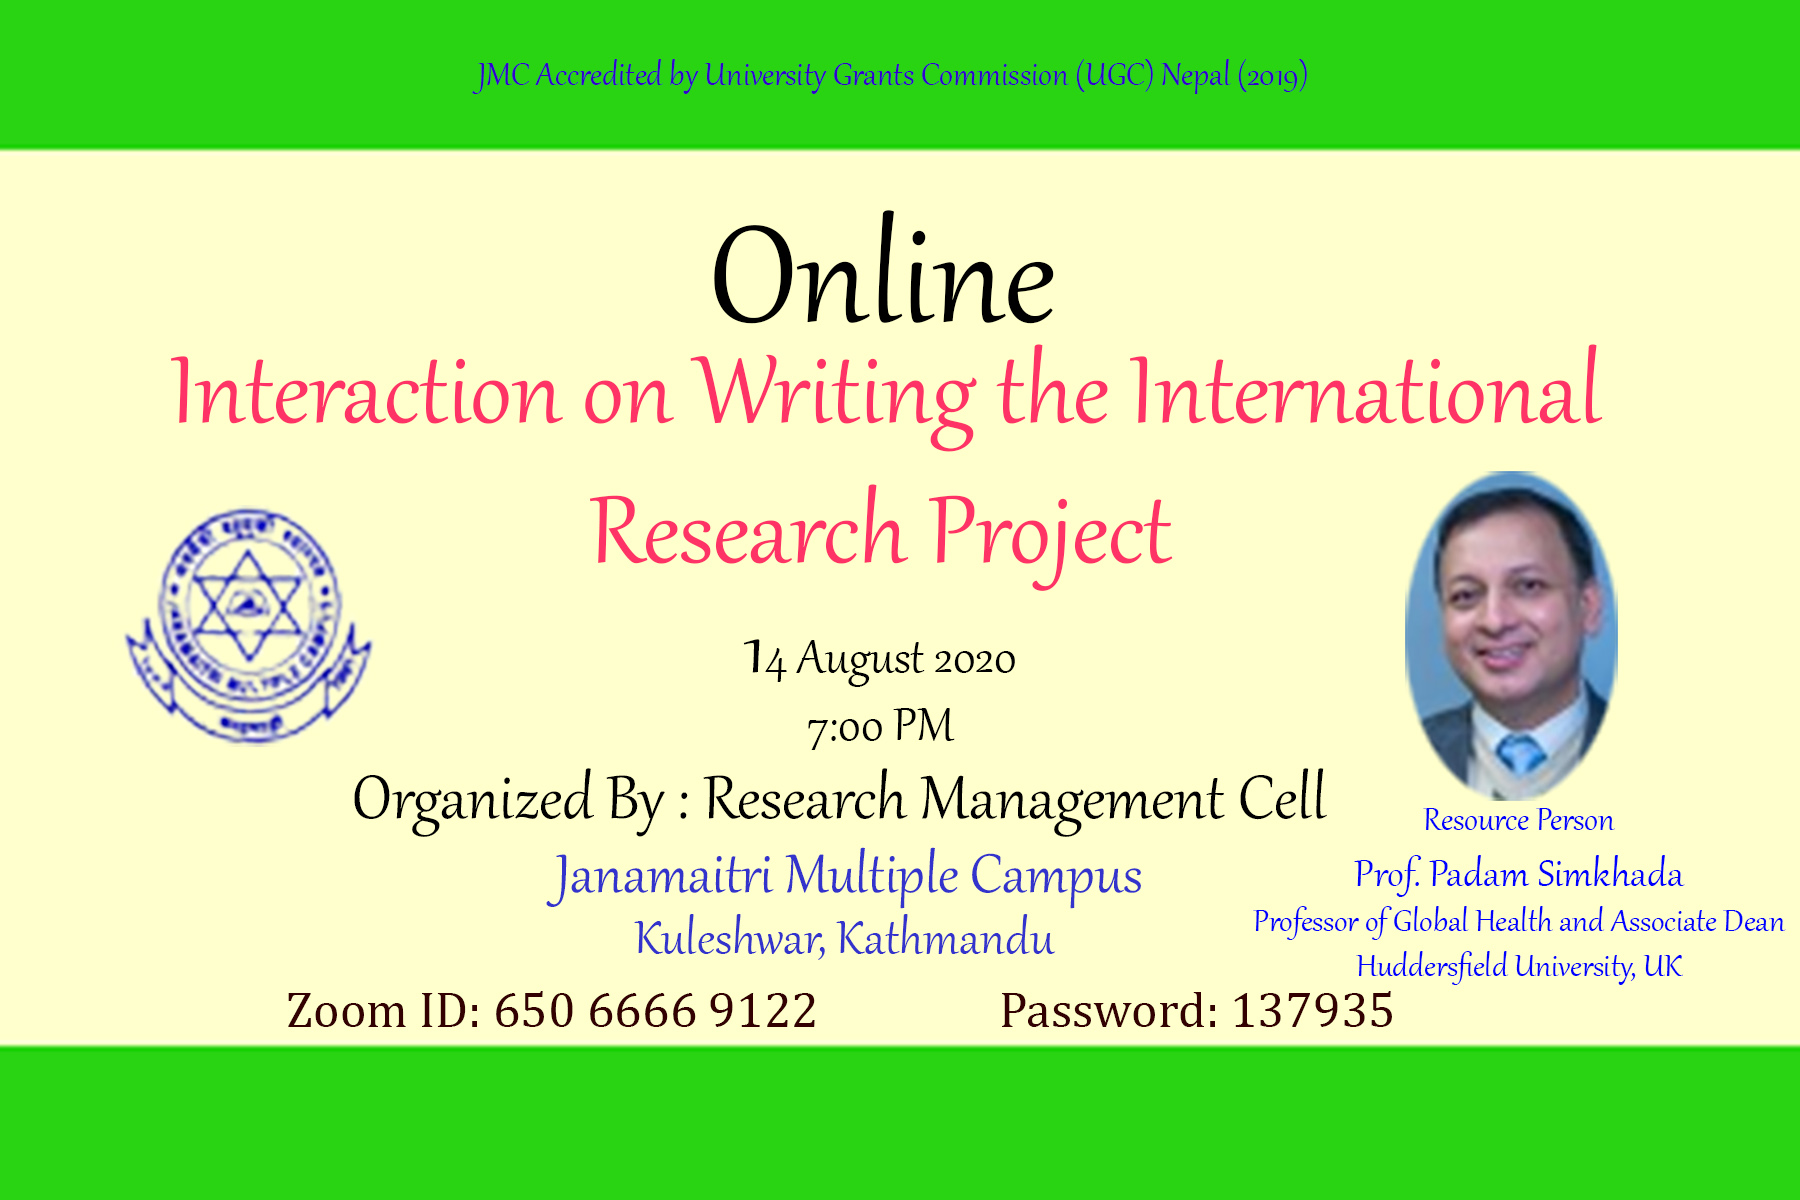 Interaction on Writing the International Research Project